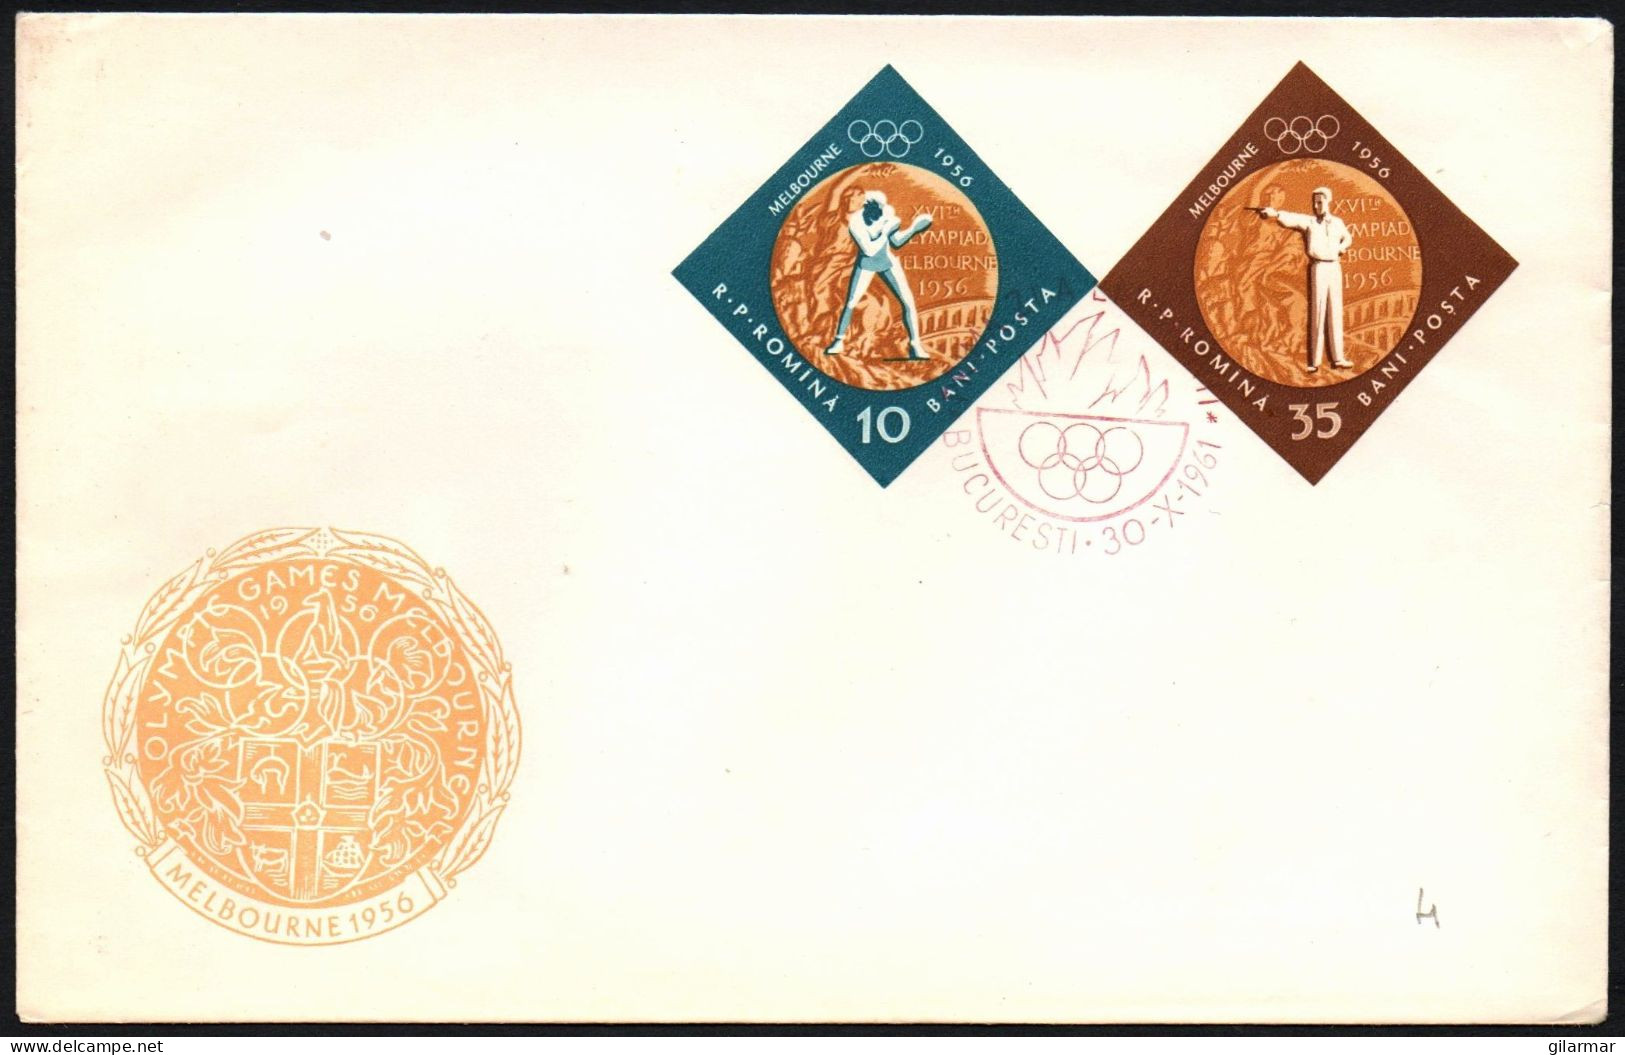 ROMANIA BUCHAREST 1961 - GOLD MEDALS AT THE OLYMPIC GAMES OF MELBOURNE '56 - FDC - BOXING / SHOOTING IMPERFORATED - G - Sommer 1956: Melbourne